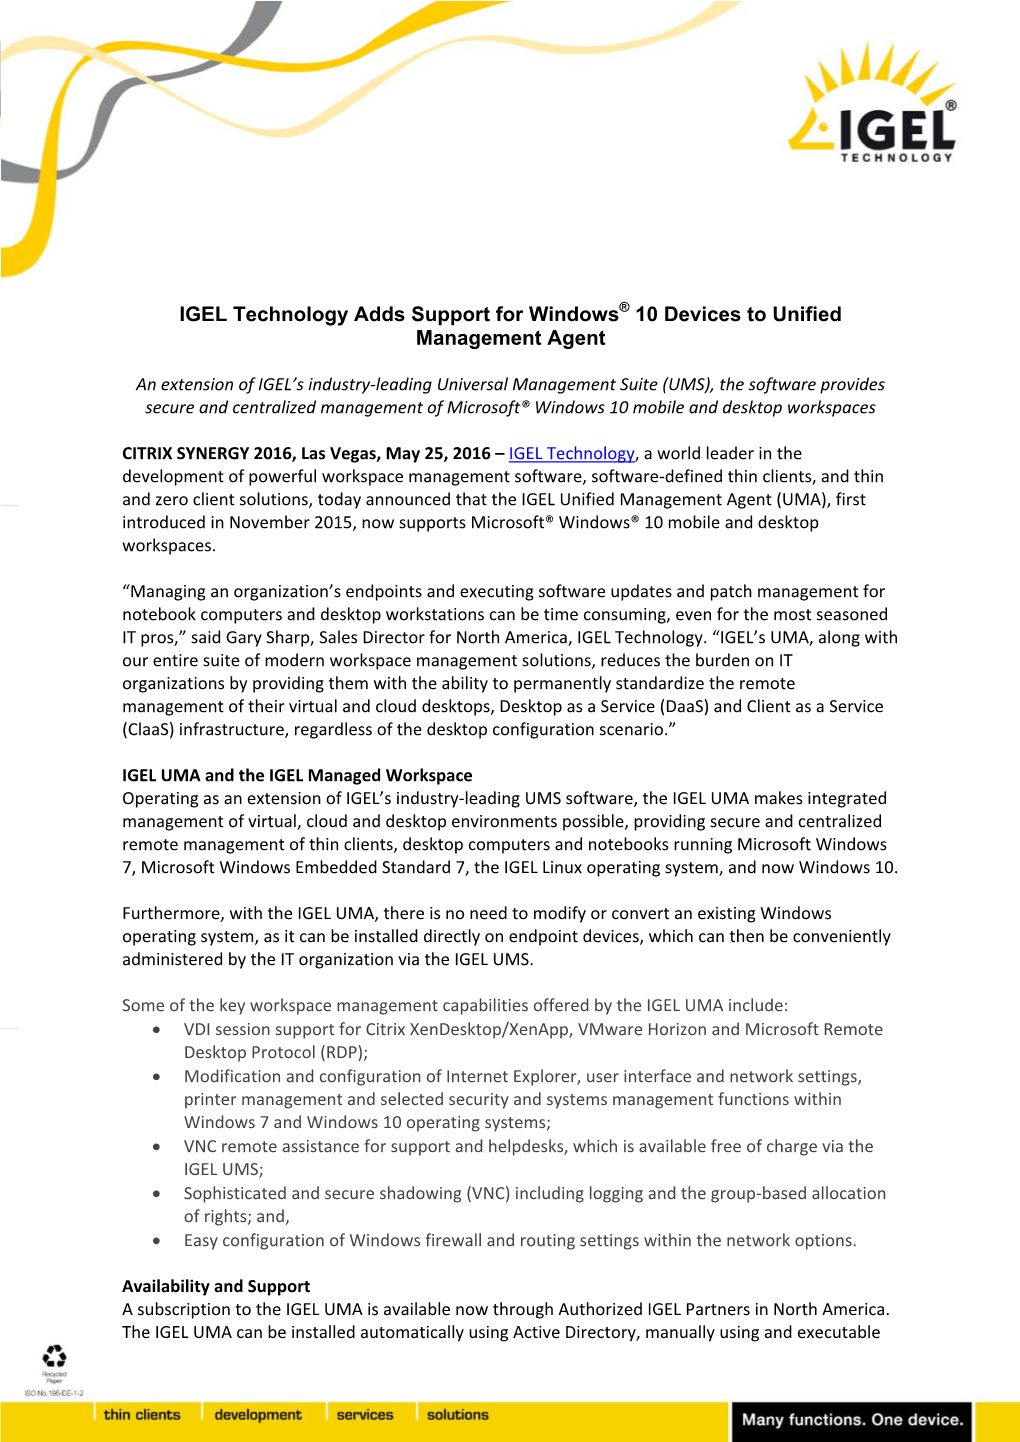 IGEL Technology Adds Support for Windows® 10 Devices to Unified Management Agent